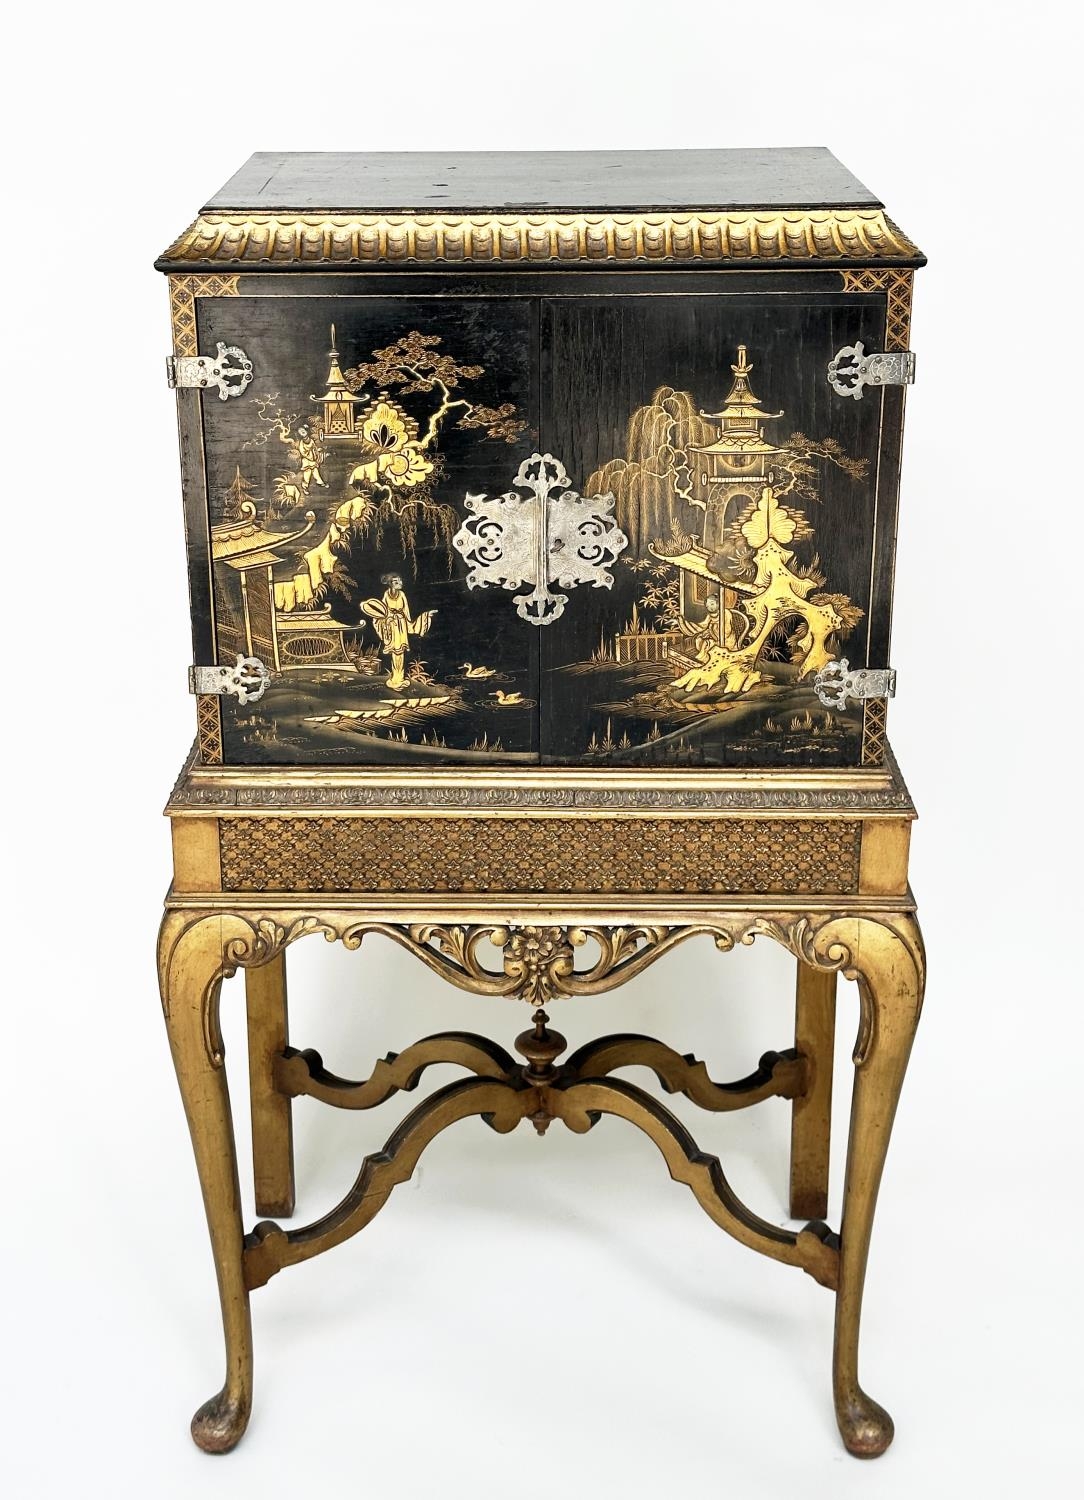 CABINET ON STAND, early 20th century English lacquered and gilt chinoiserie decorated, silvered